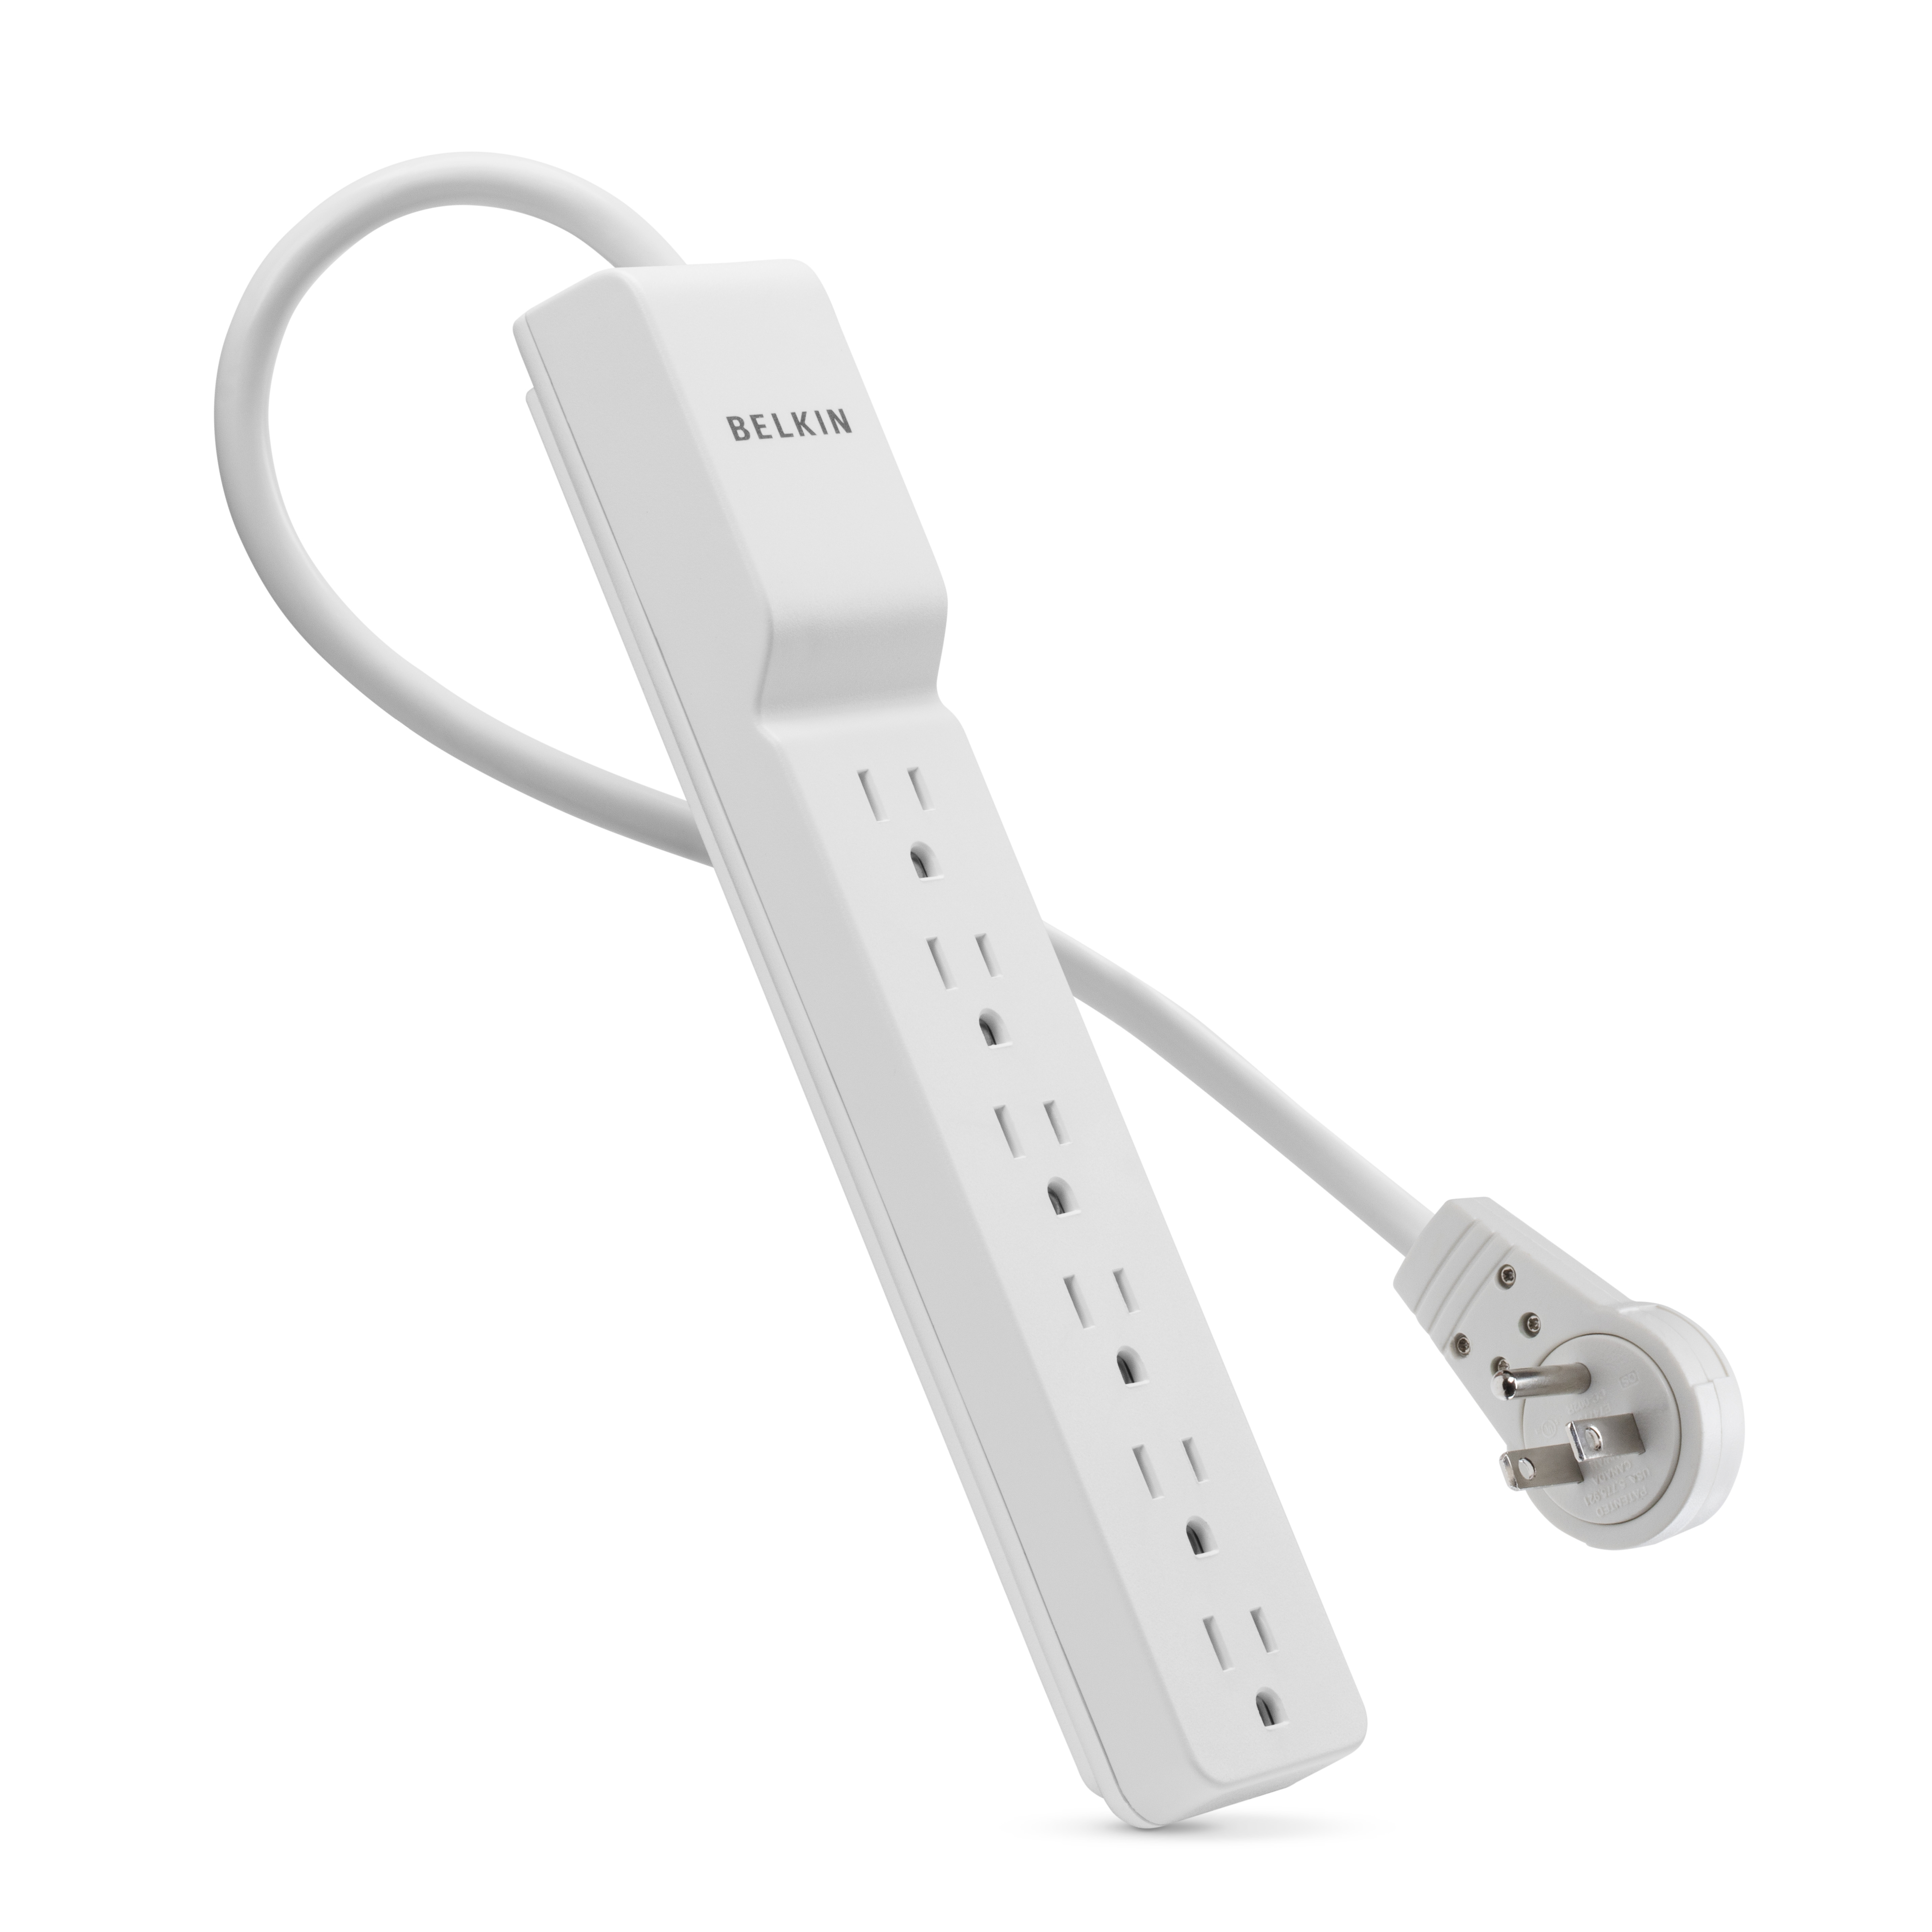 Surge Protector Buying Guide: What is a Surge Protector